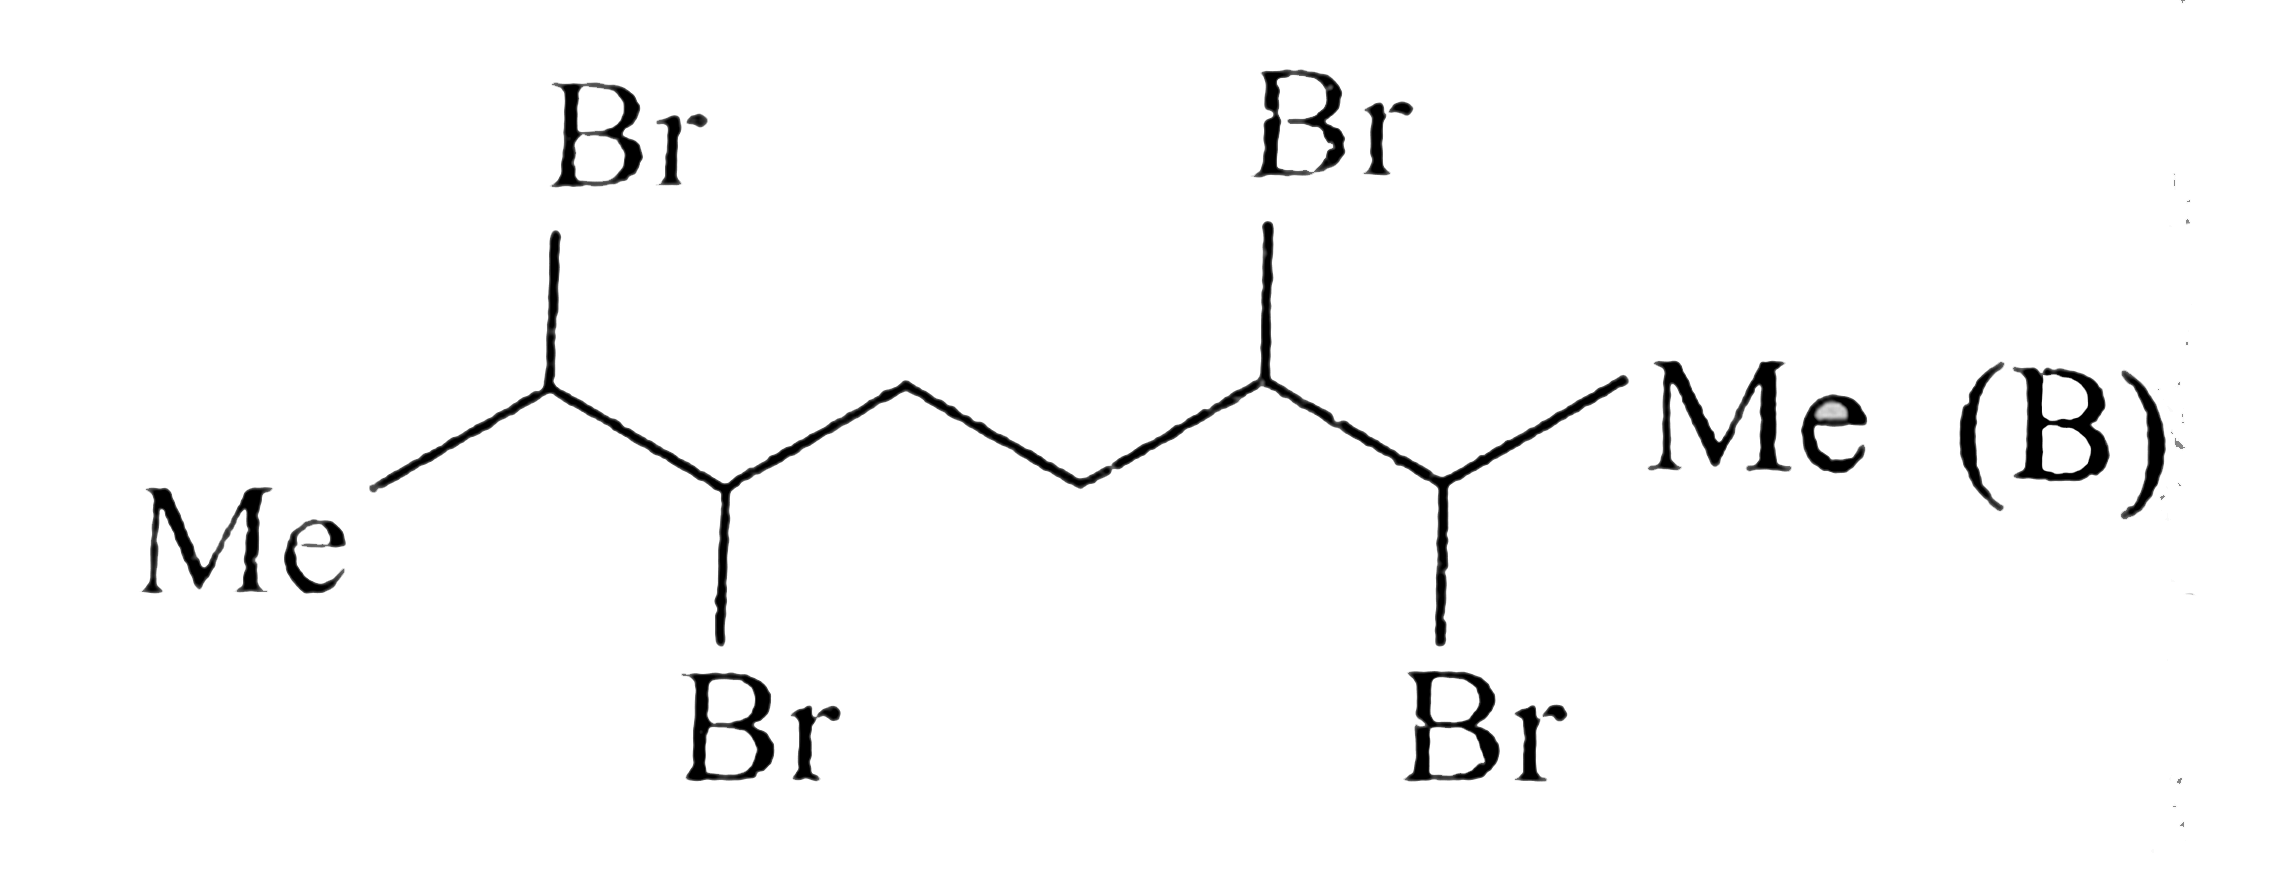 Syntesise the following:   a. Cyclohexanol (A) to 1,2,3- tridenuterocy cloxane (B).   b. E- but 2-ene to    i.  Which diastermoer of (B0 is obtaine?   ii. If Z- But 25-ene is used, which diastermoer of (B) is obtained?   c.     What is product (C) ? Which reaction  [(1) or (2)] is faster and why?